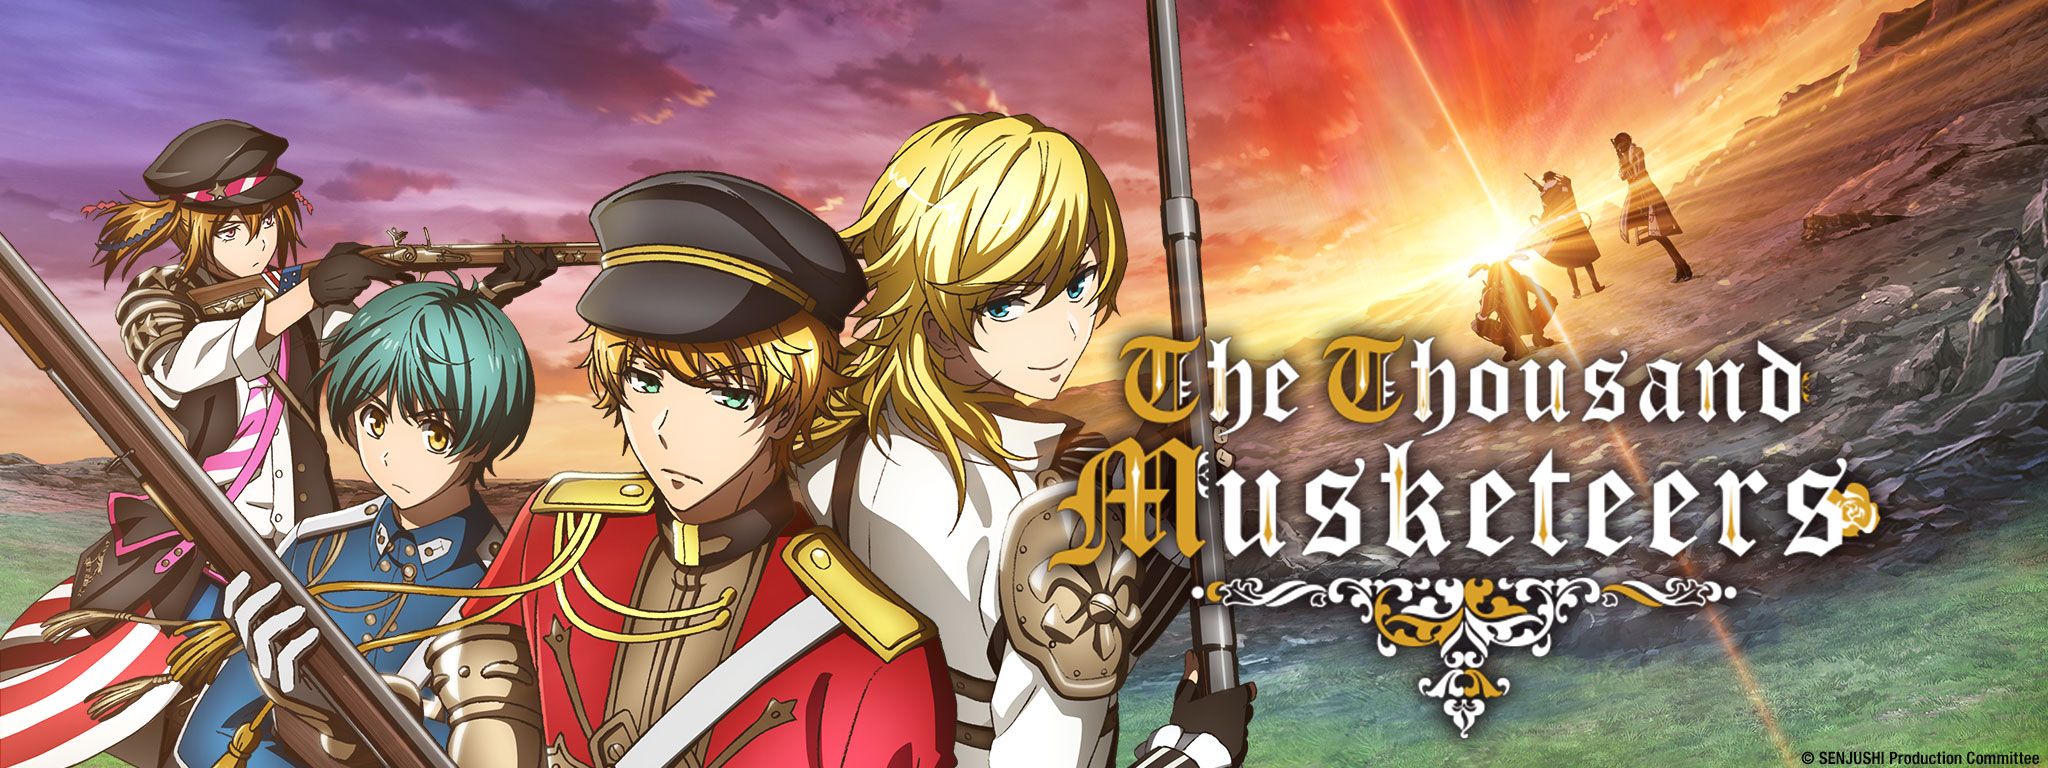 Title Art for The Thousand Musketeers